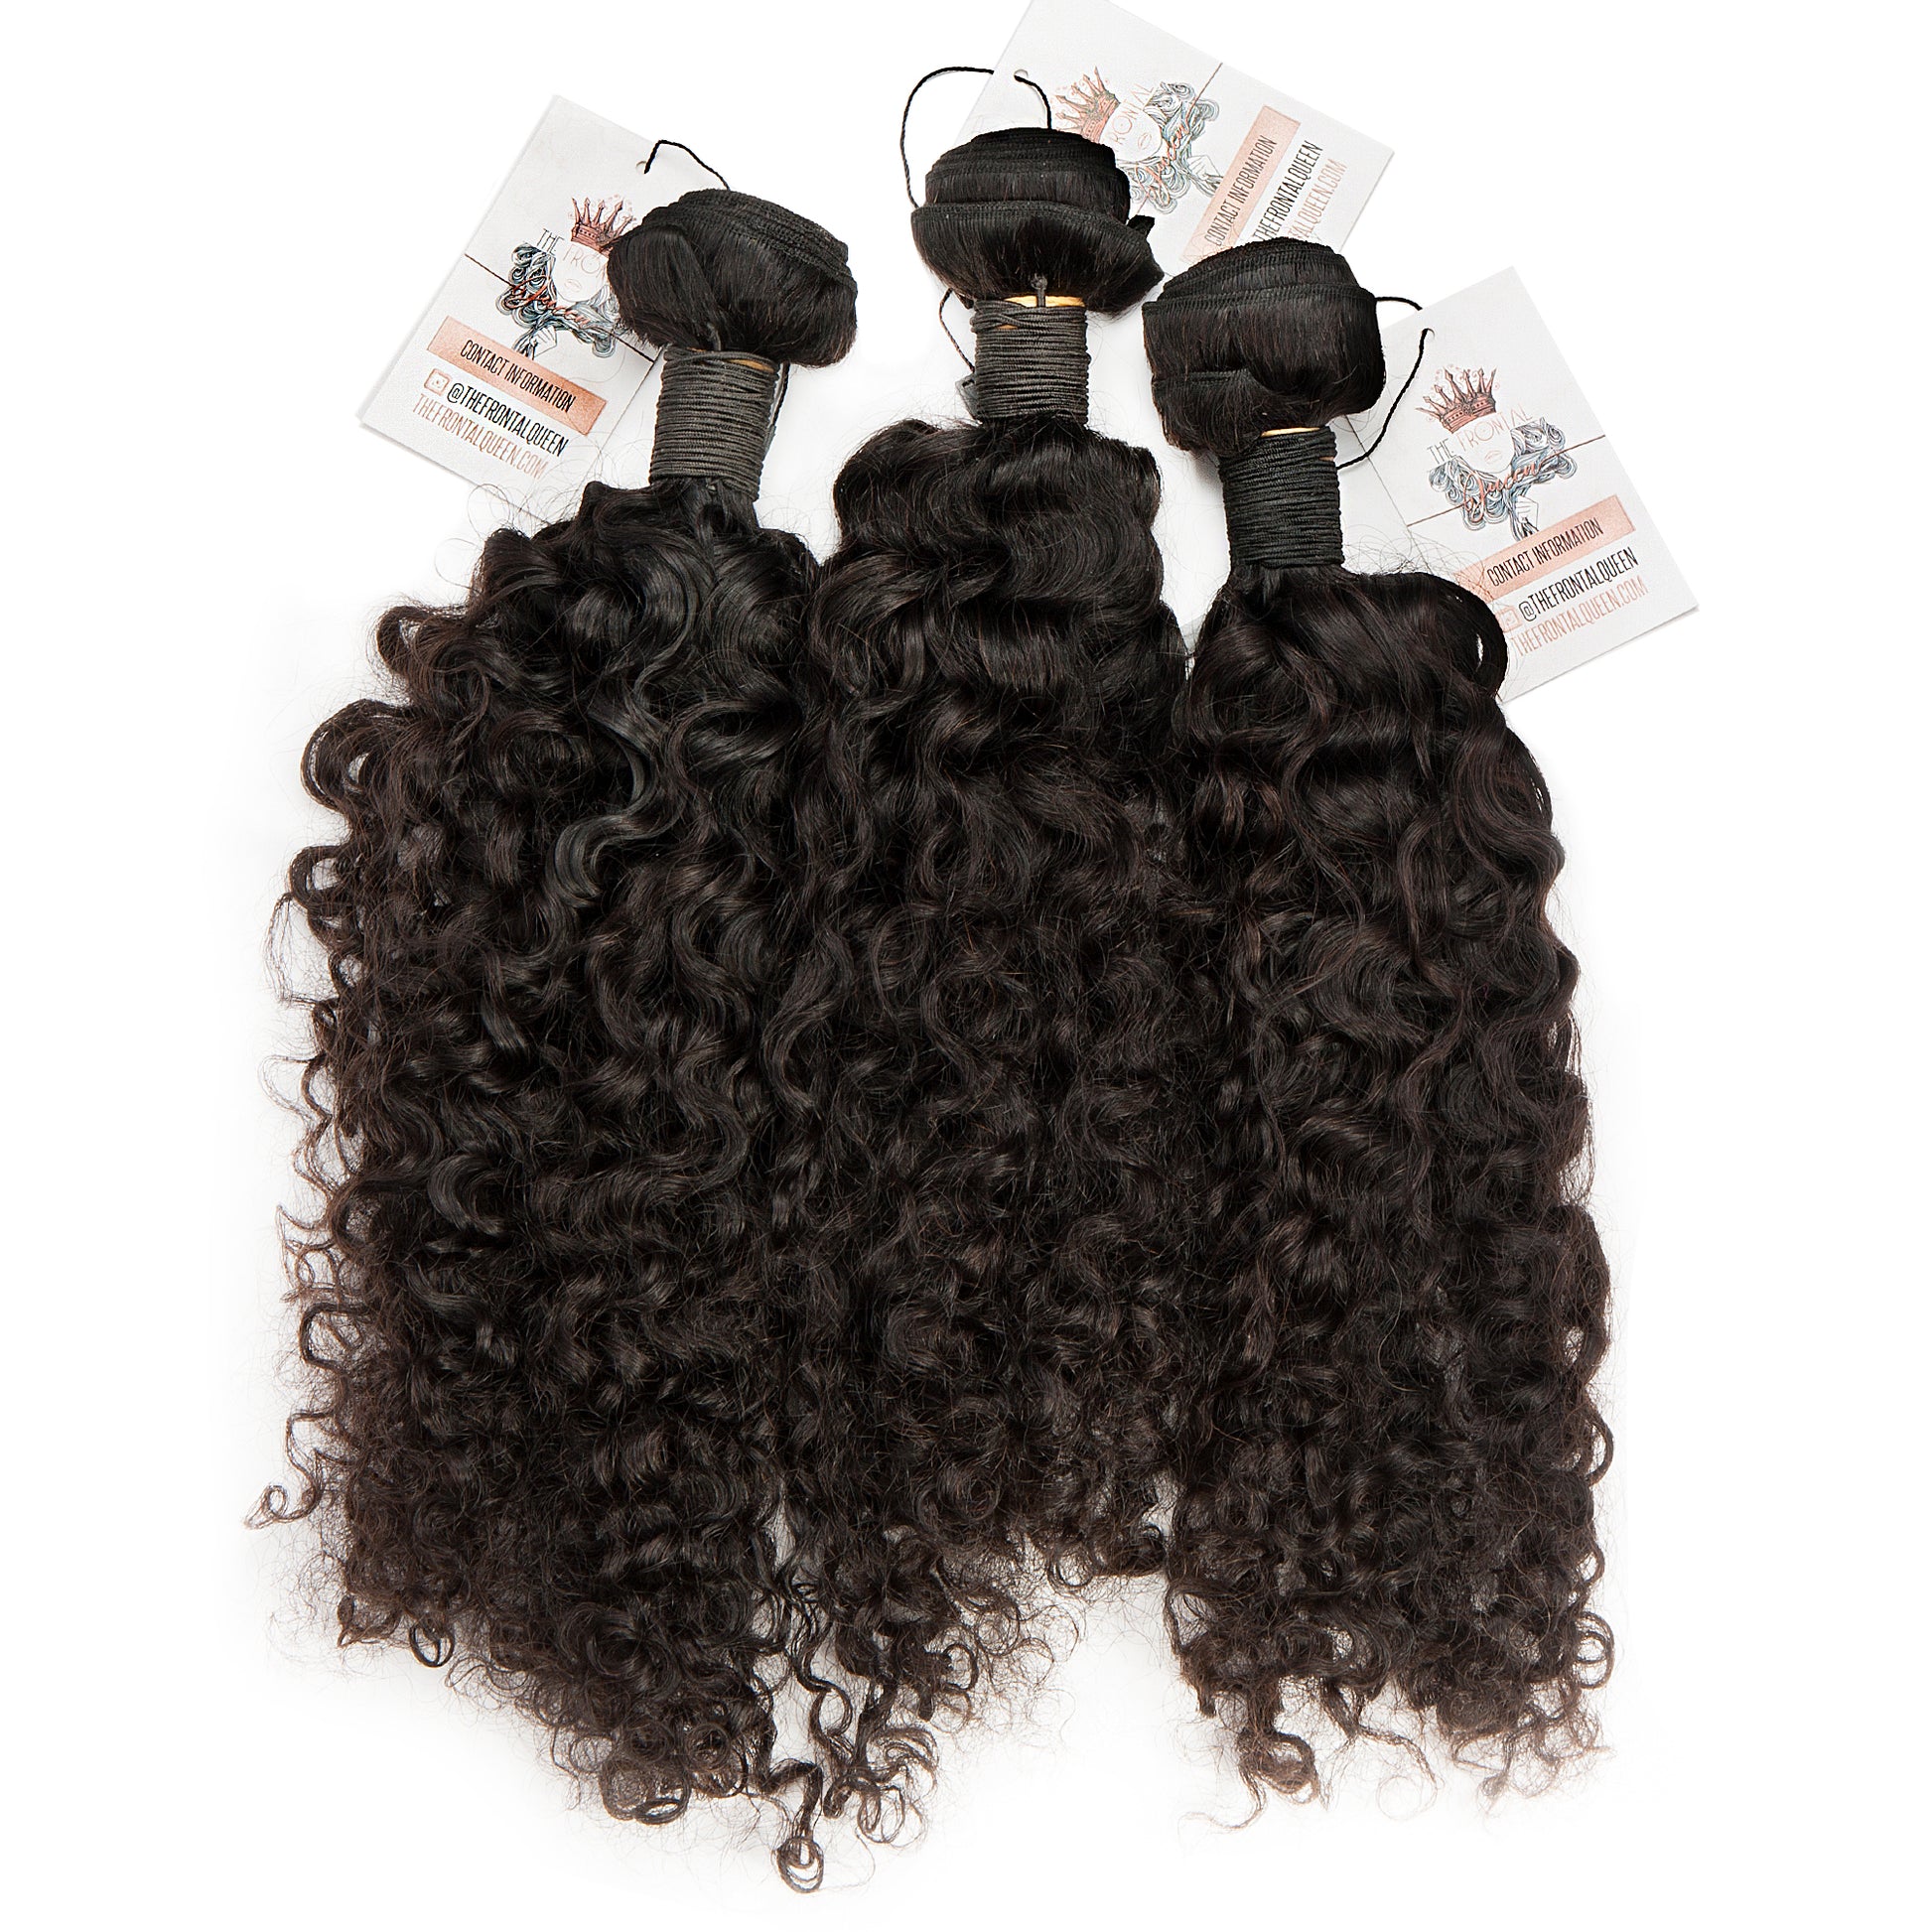 RAW Cambodian Tight Curly // Single Bundle - The Frontal Queen